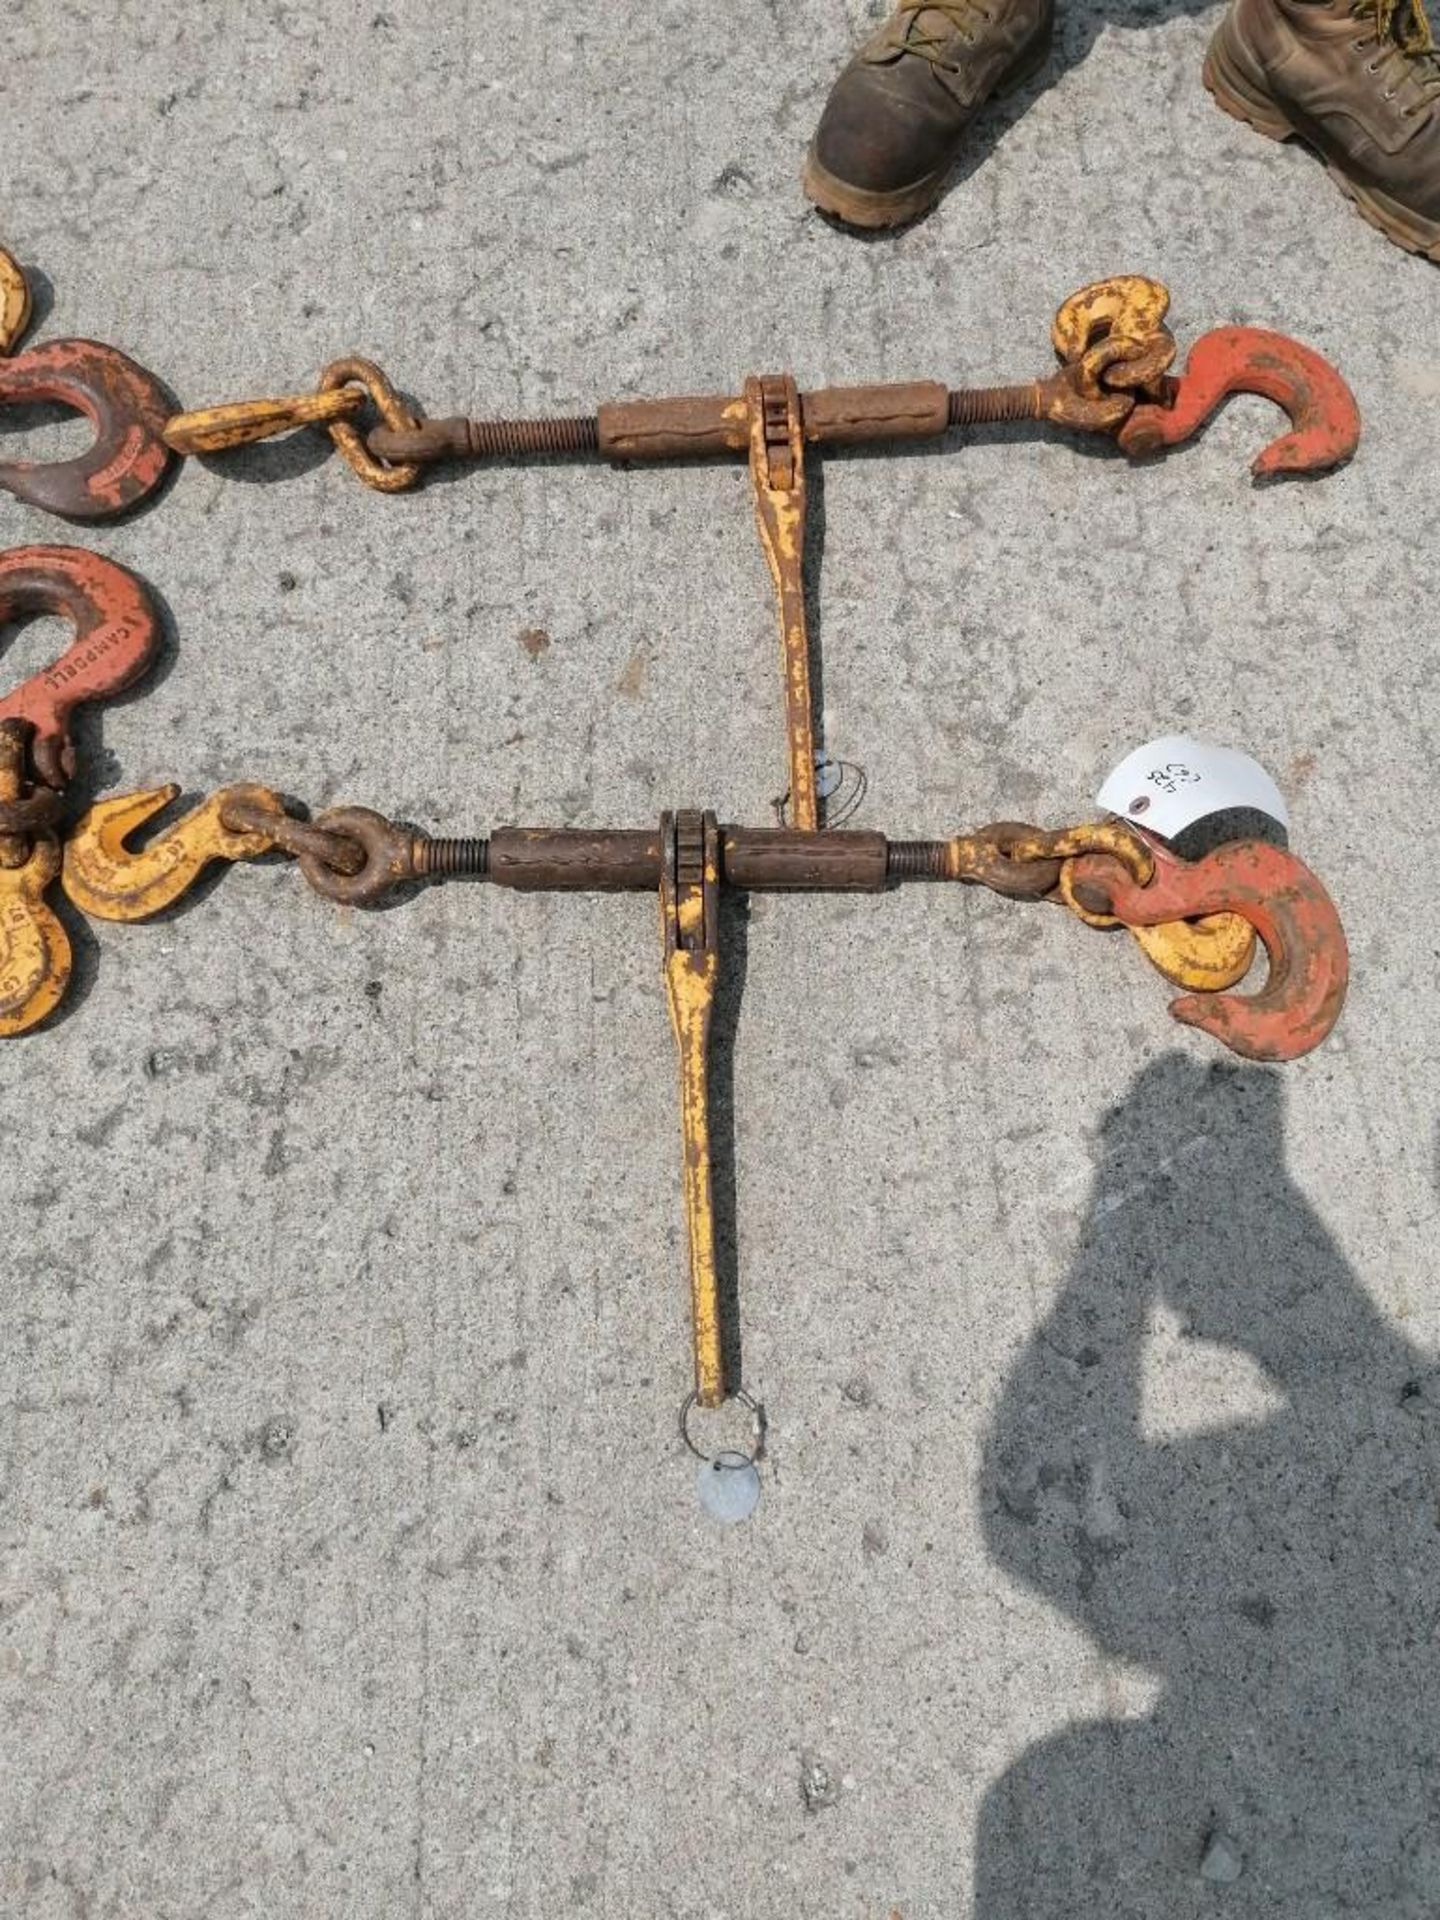 (6) Ratchet Load Binder 13000 pounds Double hooked. Located at 301 E Henry Street, Mt. Pleasant, - Image 2 of 4